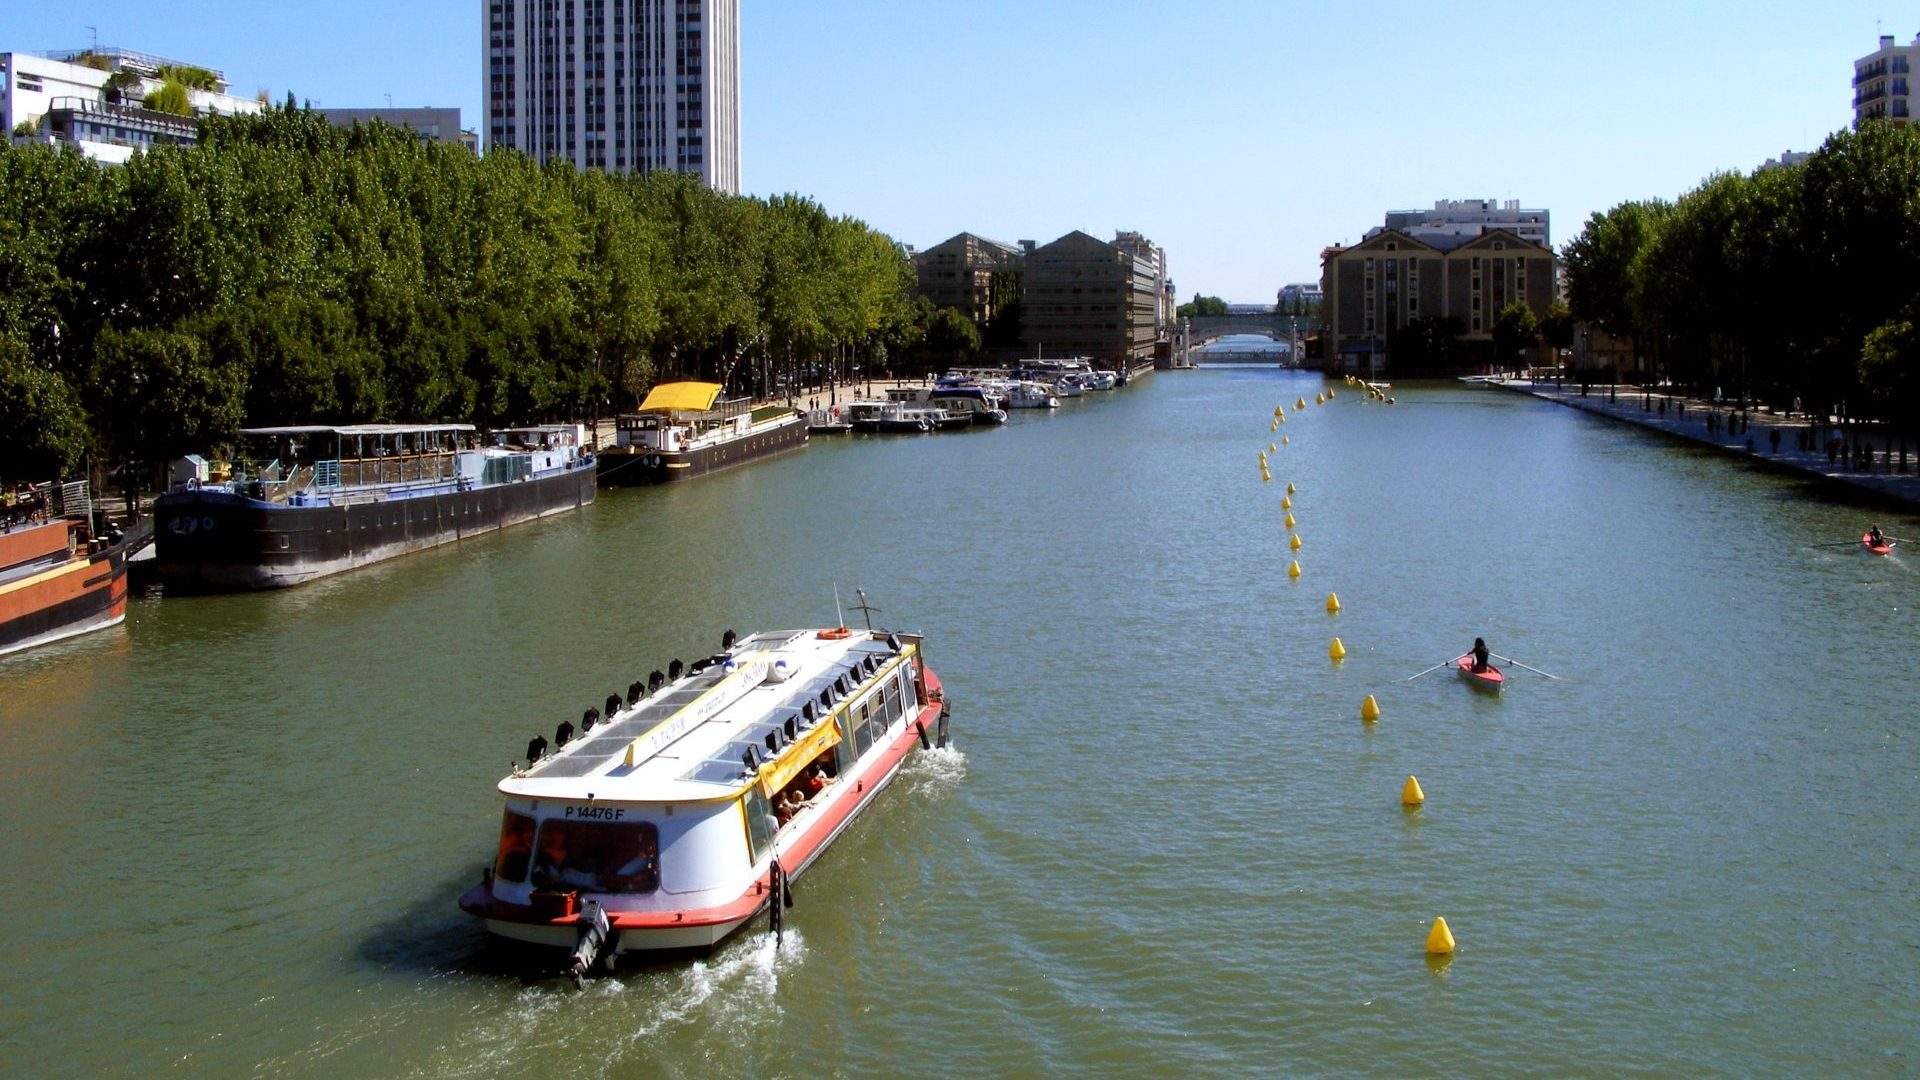 You Can Now Take a Dip In a Parisian Canal